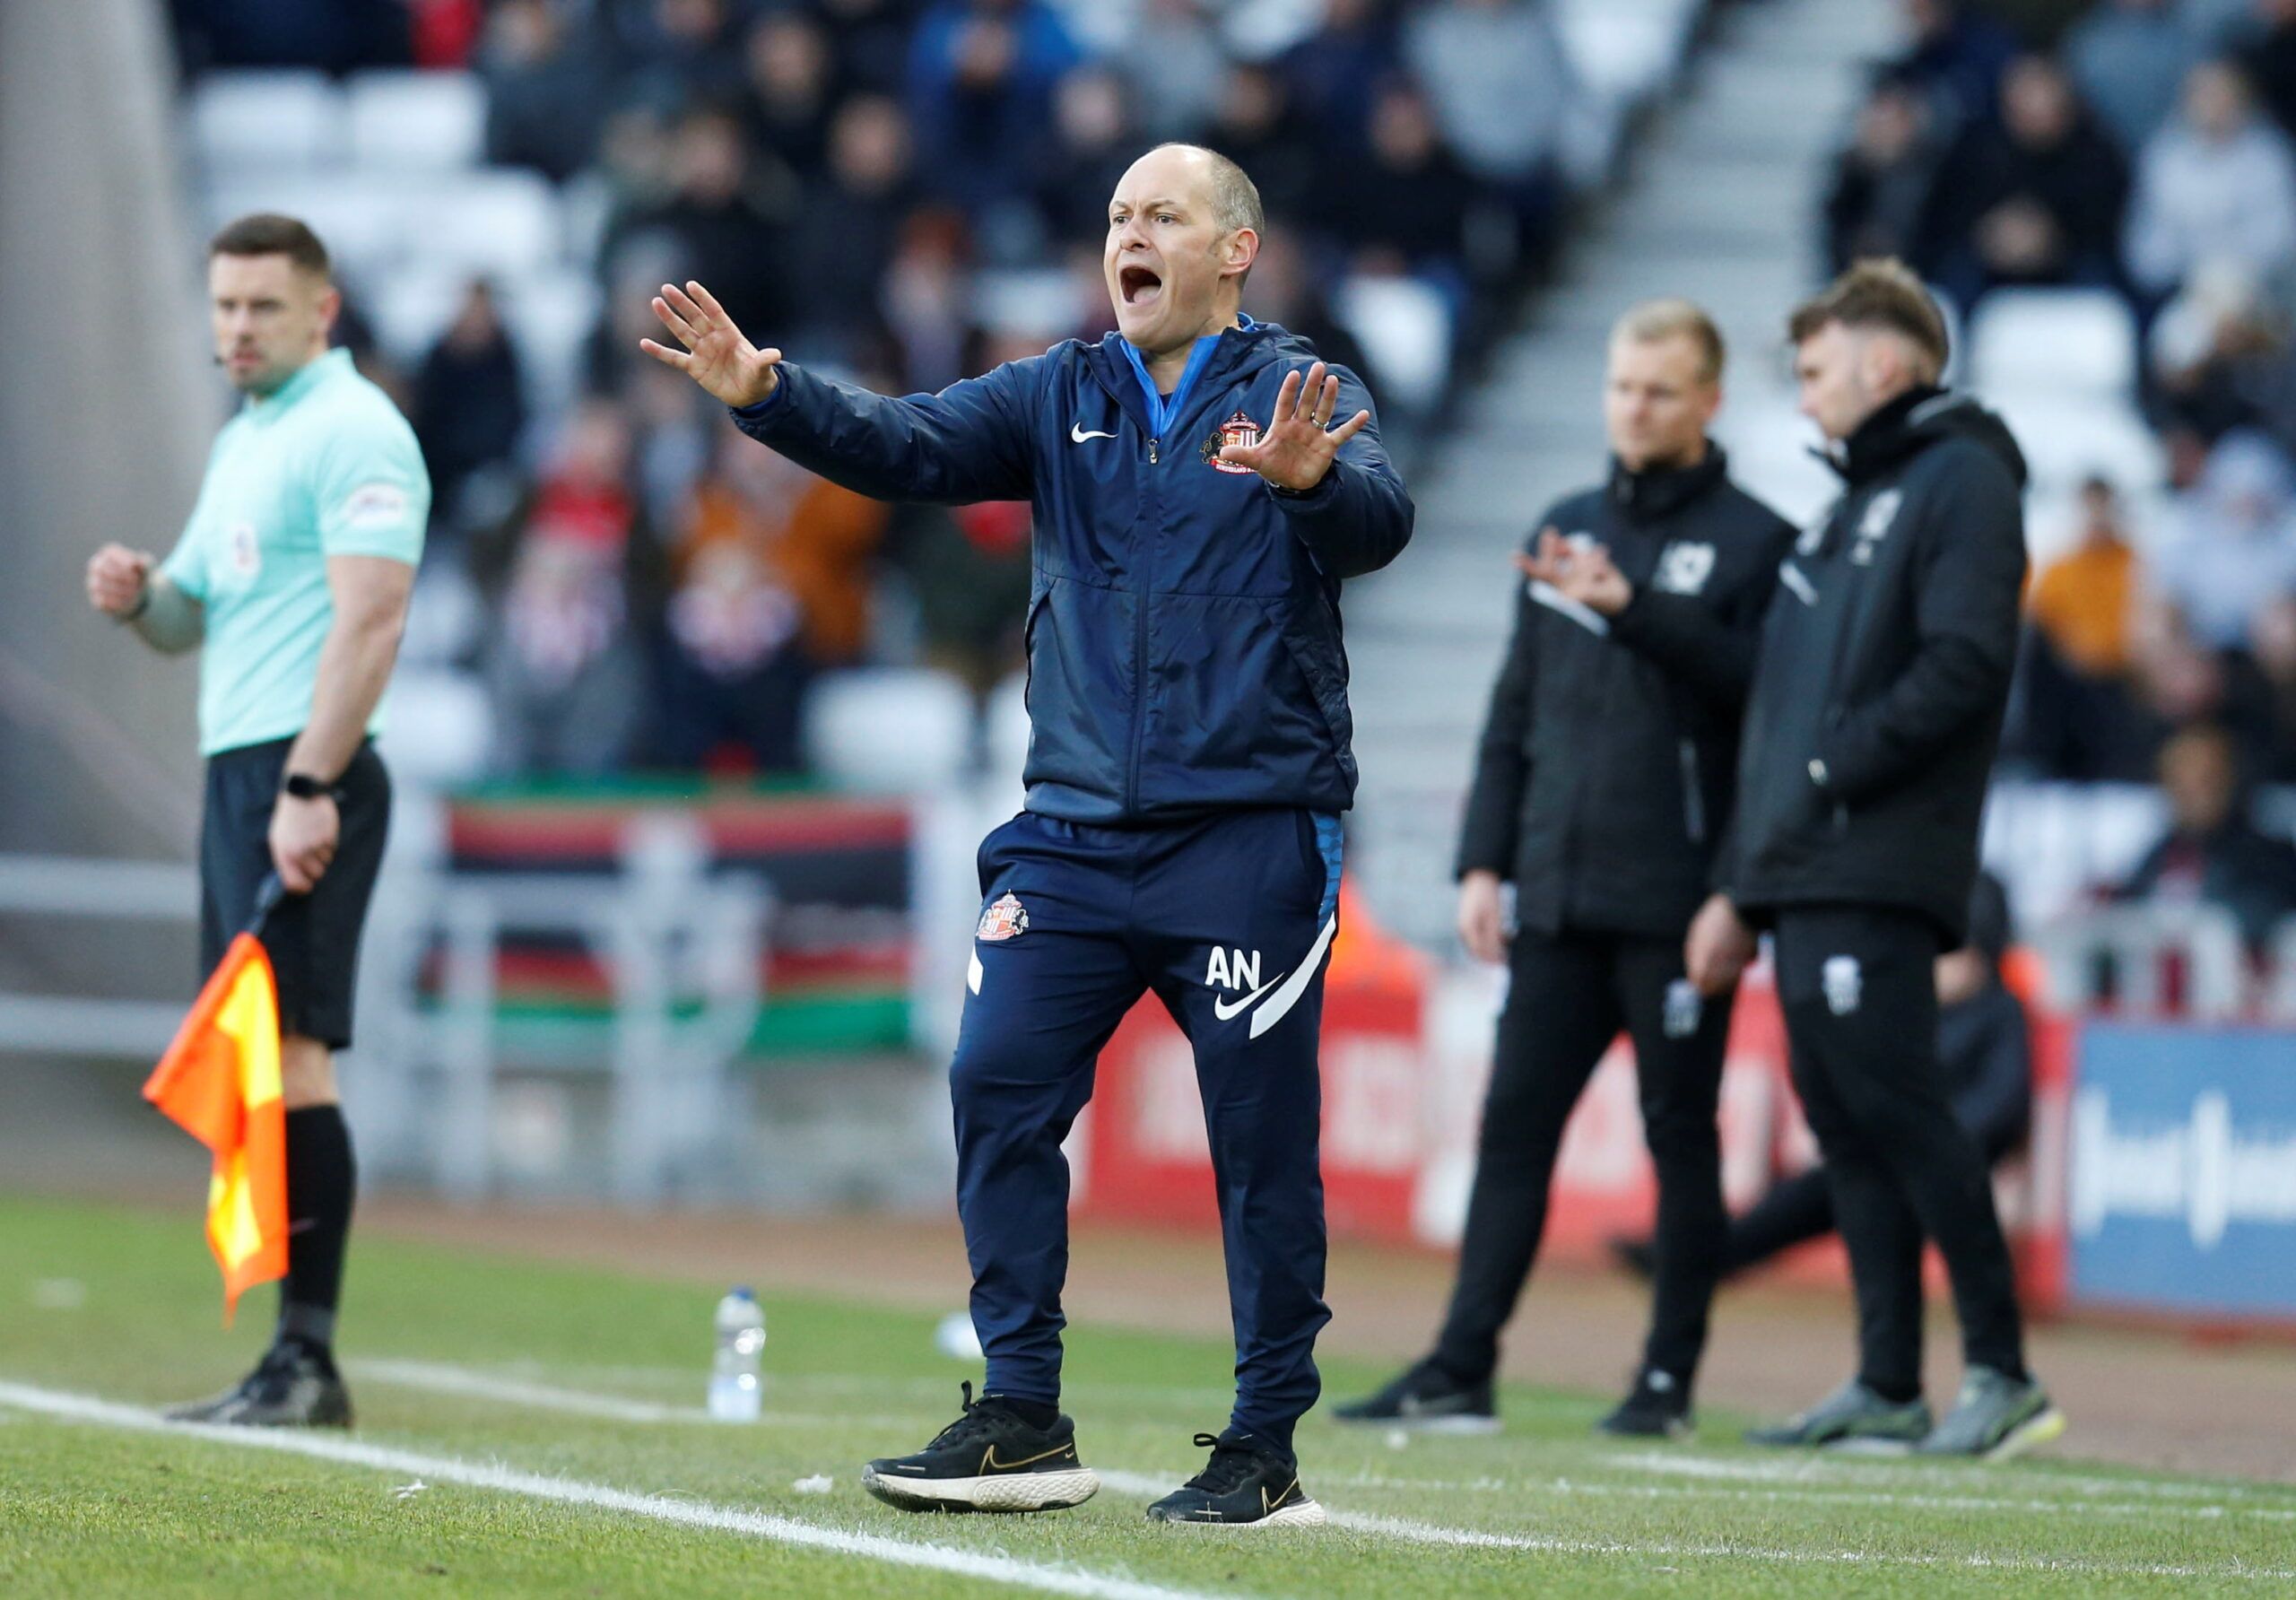 Soccer Football - Sunderland v Milton Keynes Dons - Stadium of Light, Sunderland, Britain - February 19, 2022 Sunderland manager Alex Neil  Action Images/Ed Sykes??EDITORIAL USE ONLY. No use with unauthorized audio, video, data, fixture lists, club/league logos or 